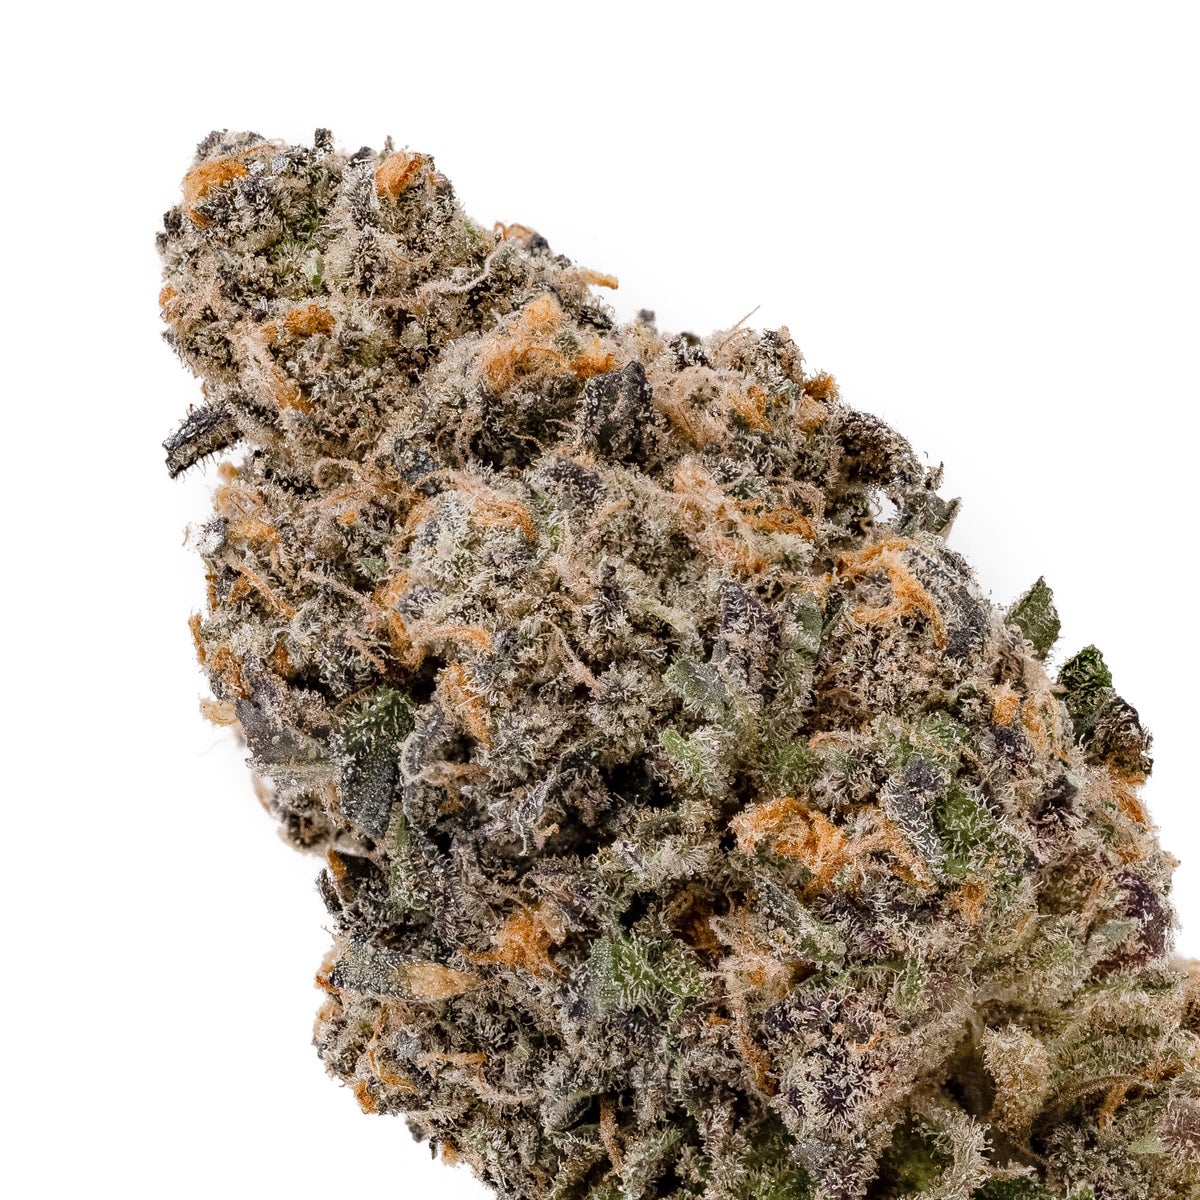 Forest green with bright green sprinkled across the bud, hints of purple with vibrant orang hairs covered in a coating of trichomes